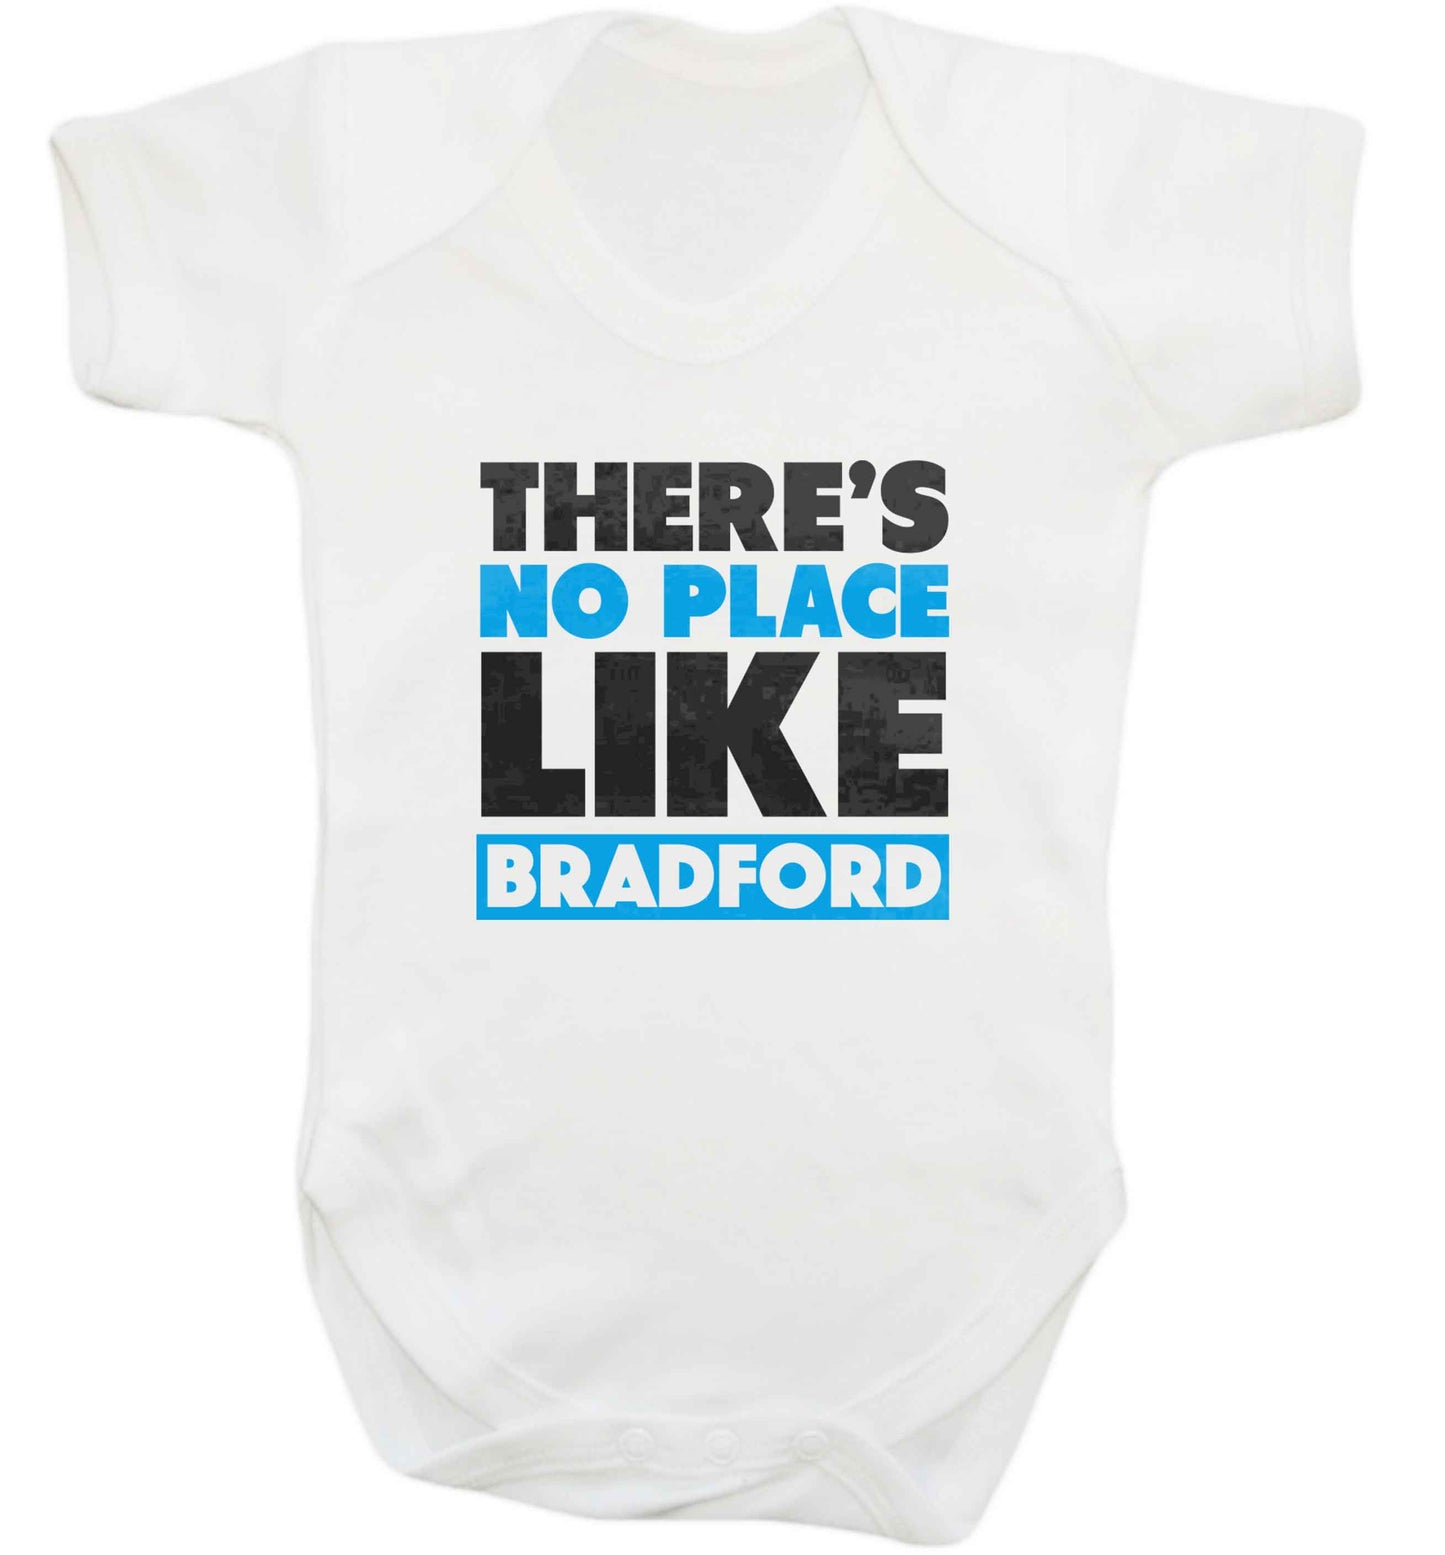 There's no place like Bradford baby vest white 18-24 months